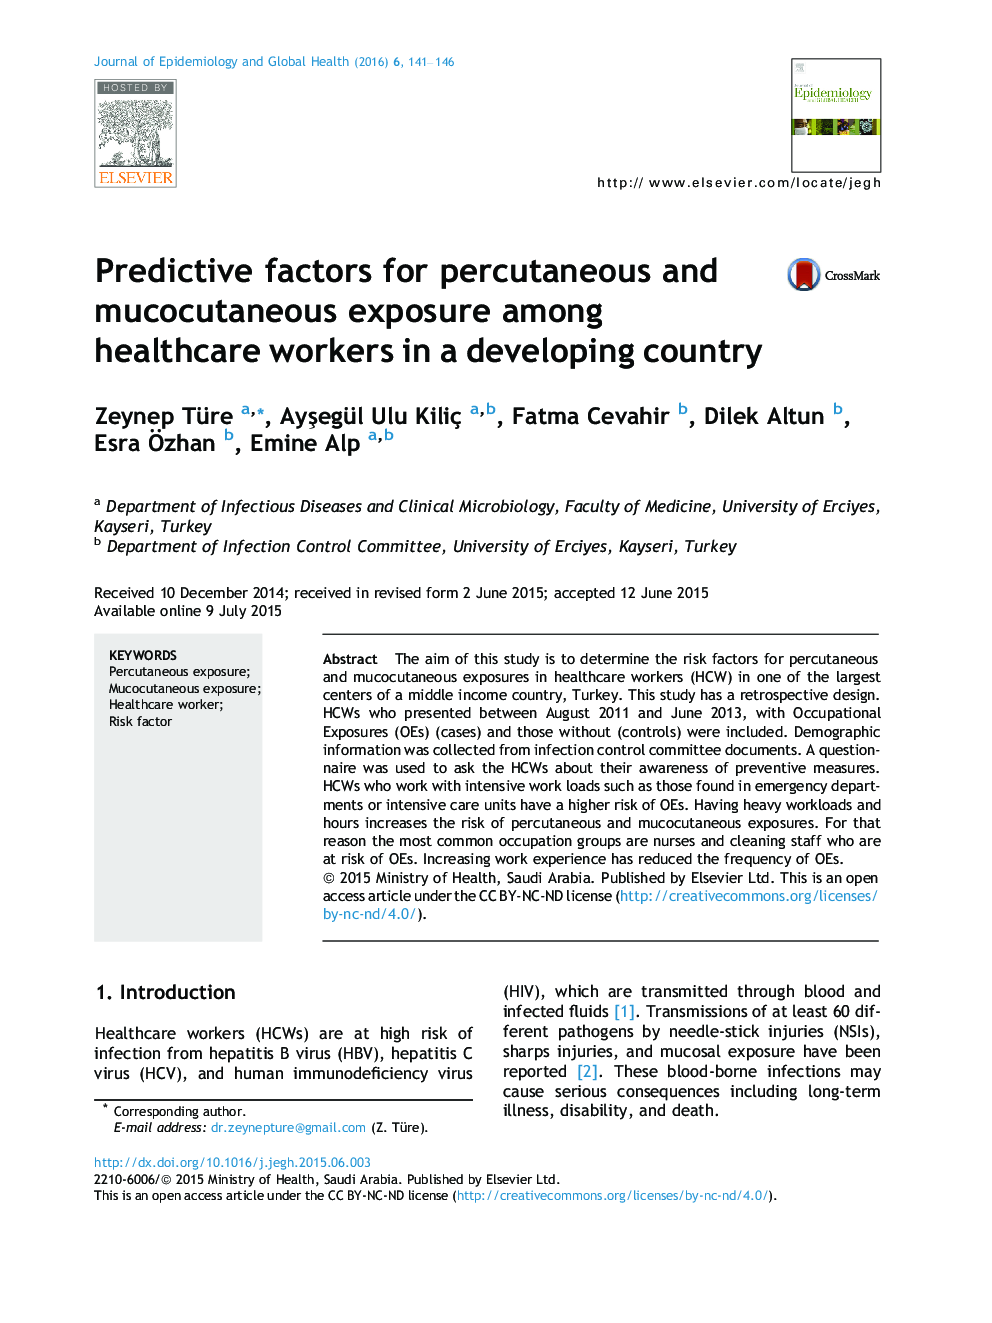 Predictive factors for percutaneous and mucocutaneous exposure among healthcare workers in a developing country